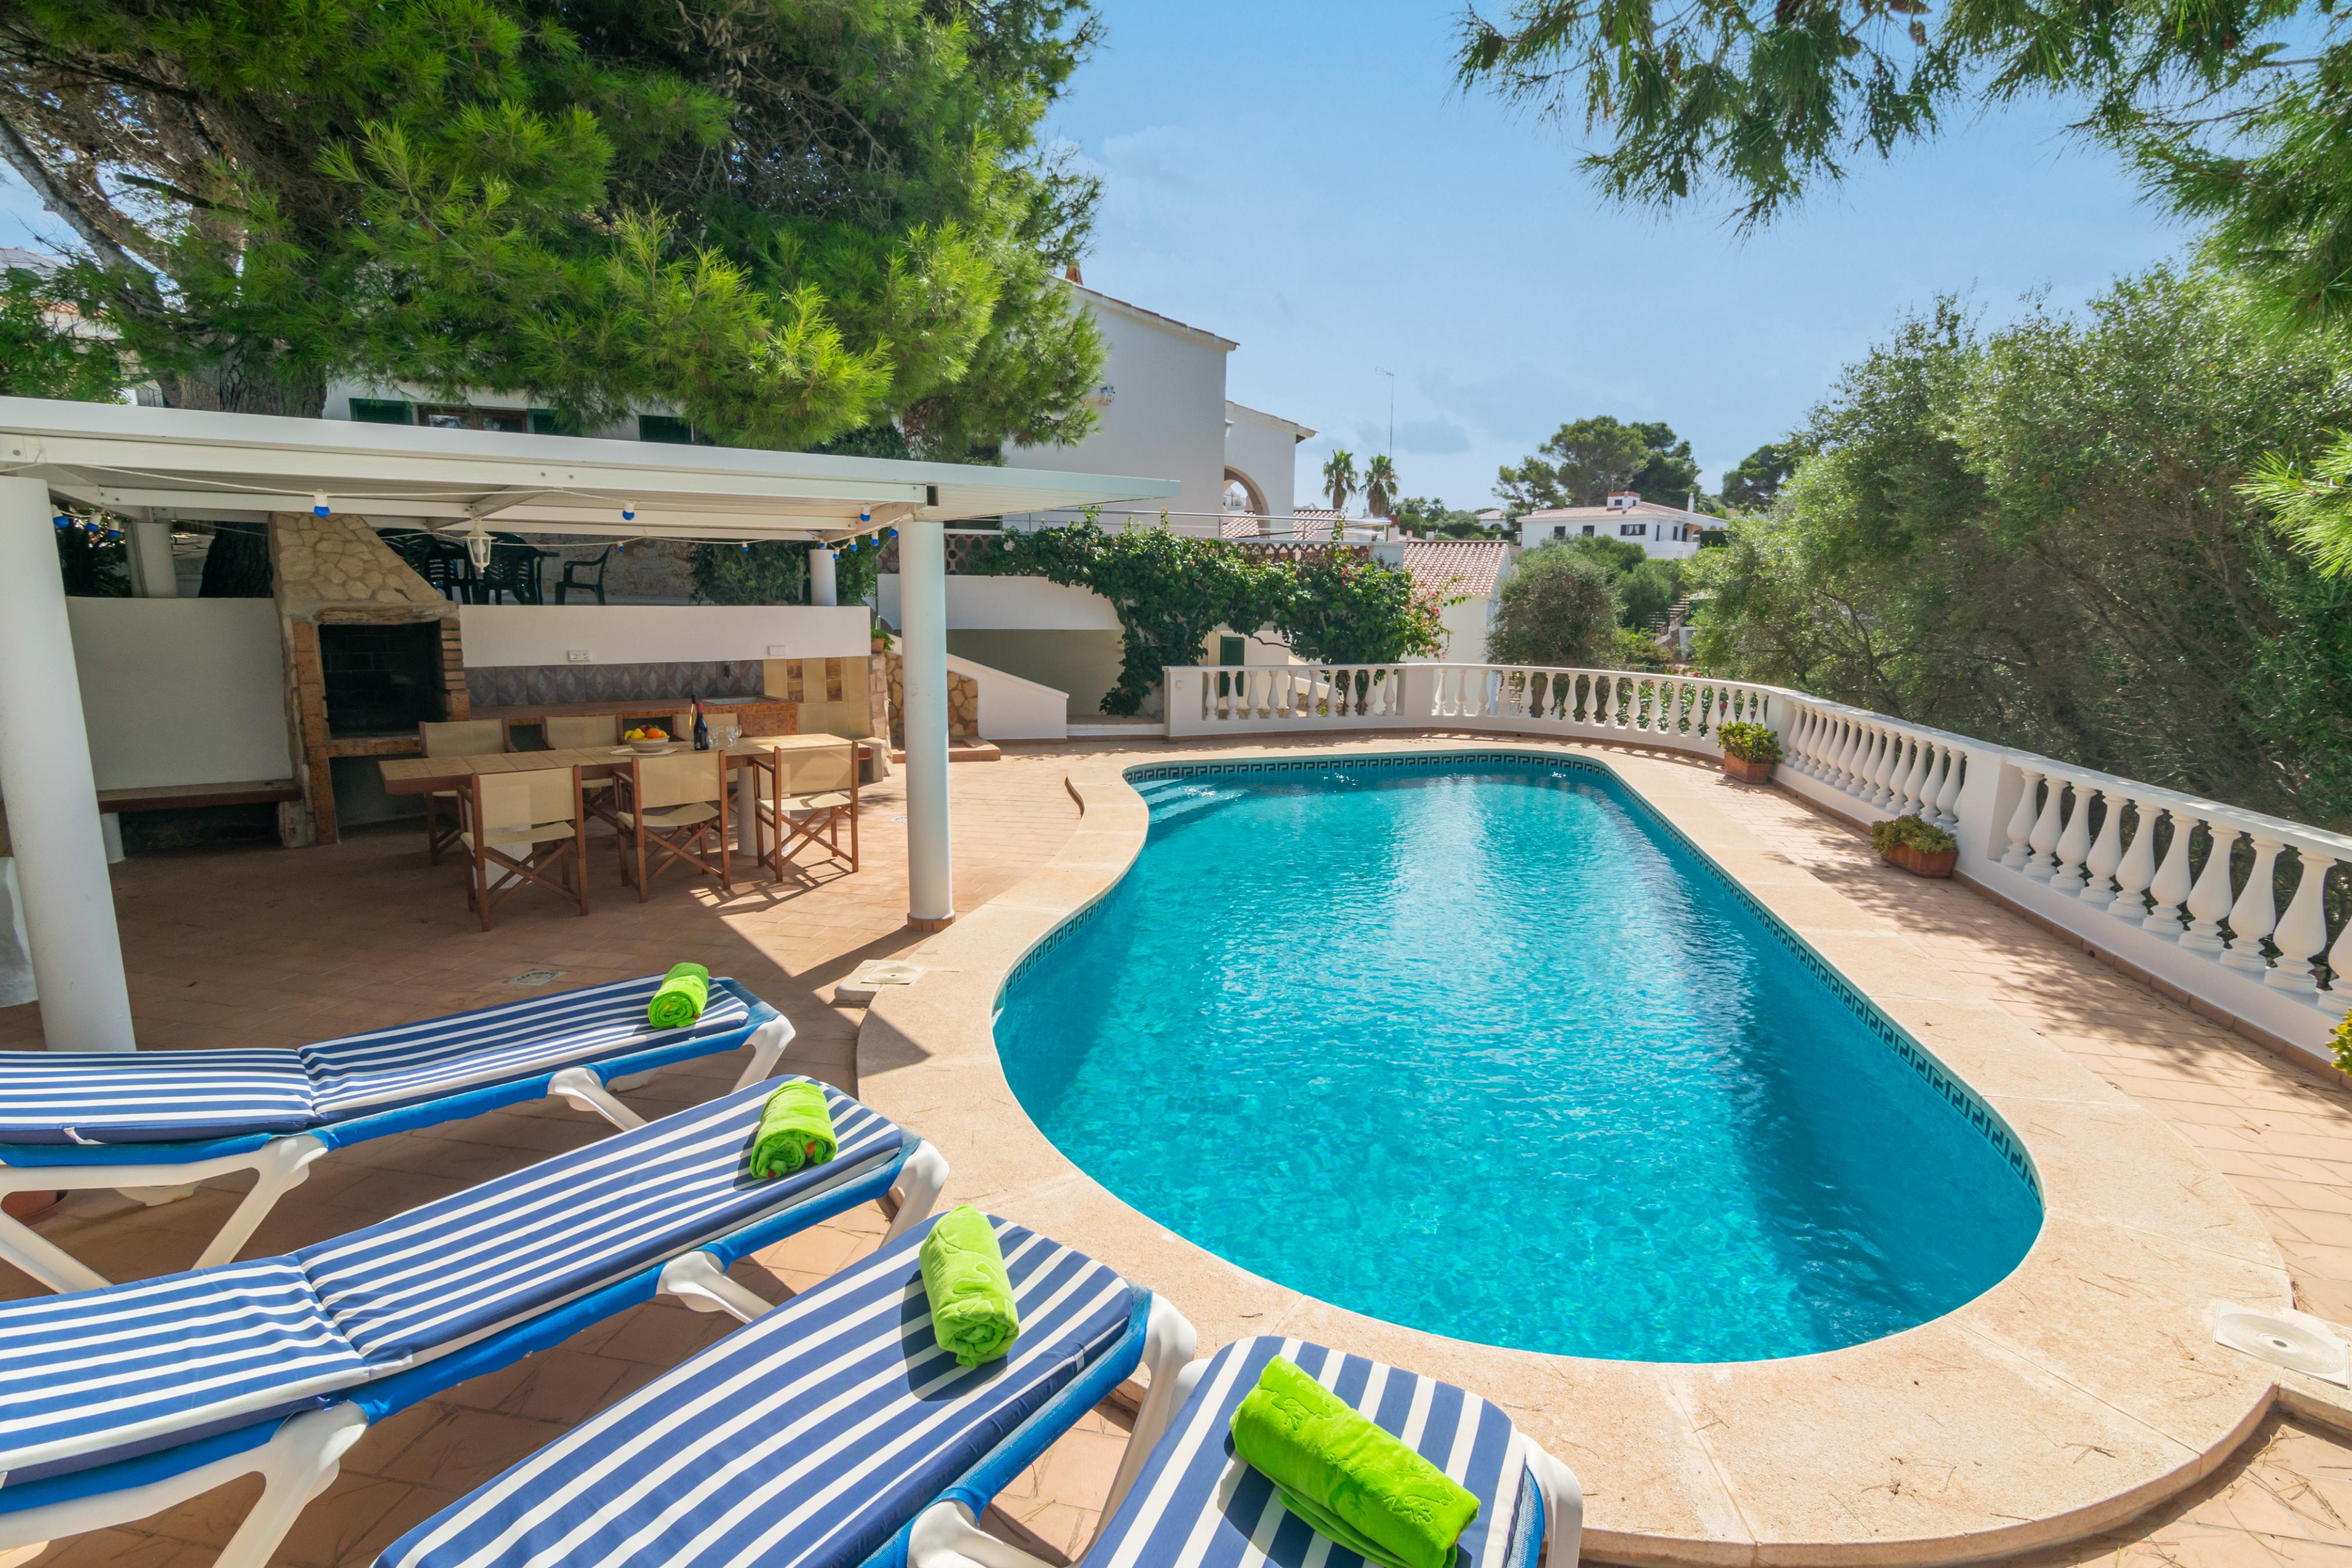 Property Image 2 - CAN JAUME 6 - Villa very close to the sea, with private pool and free WiFi.